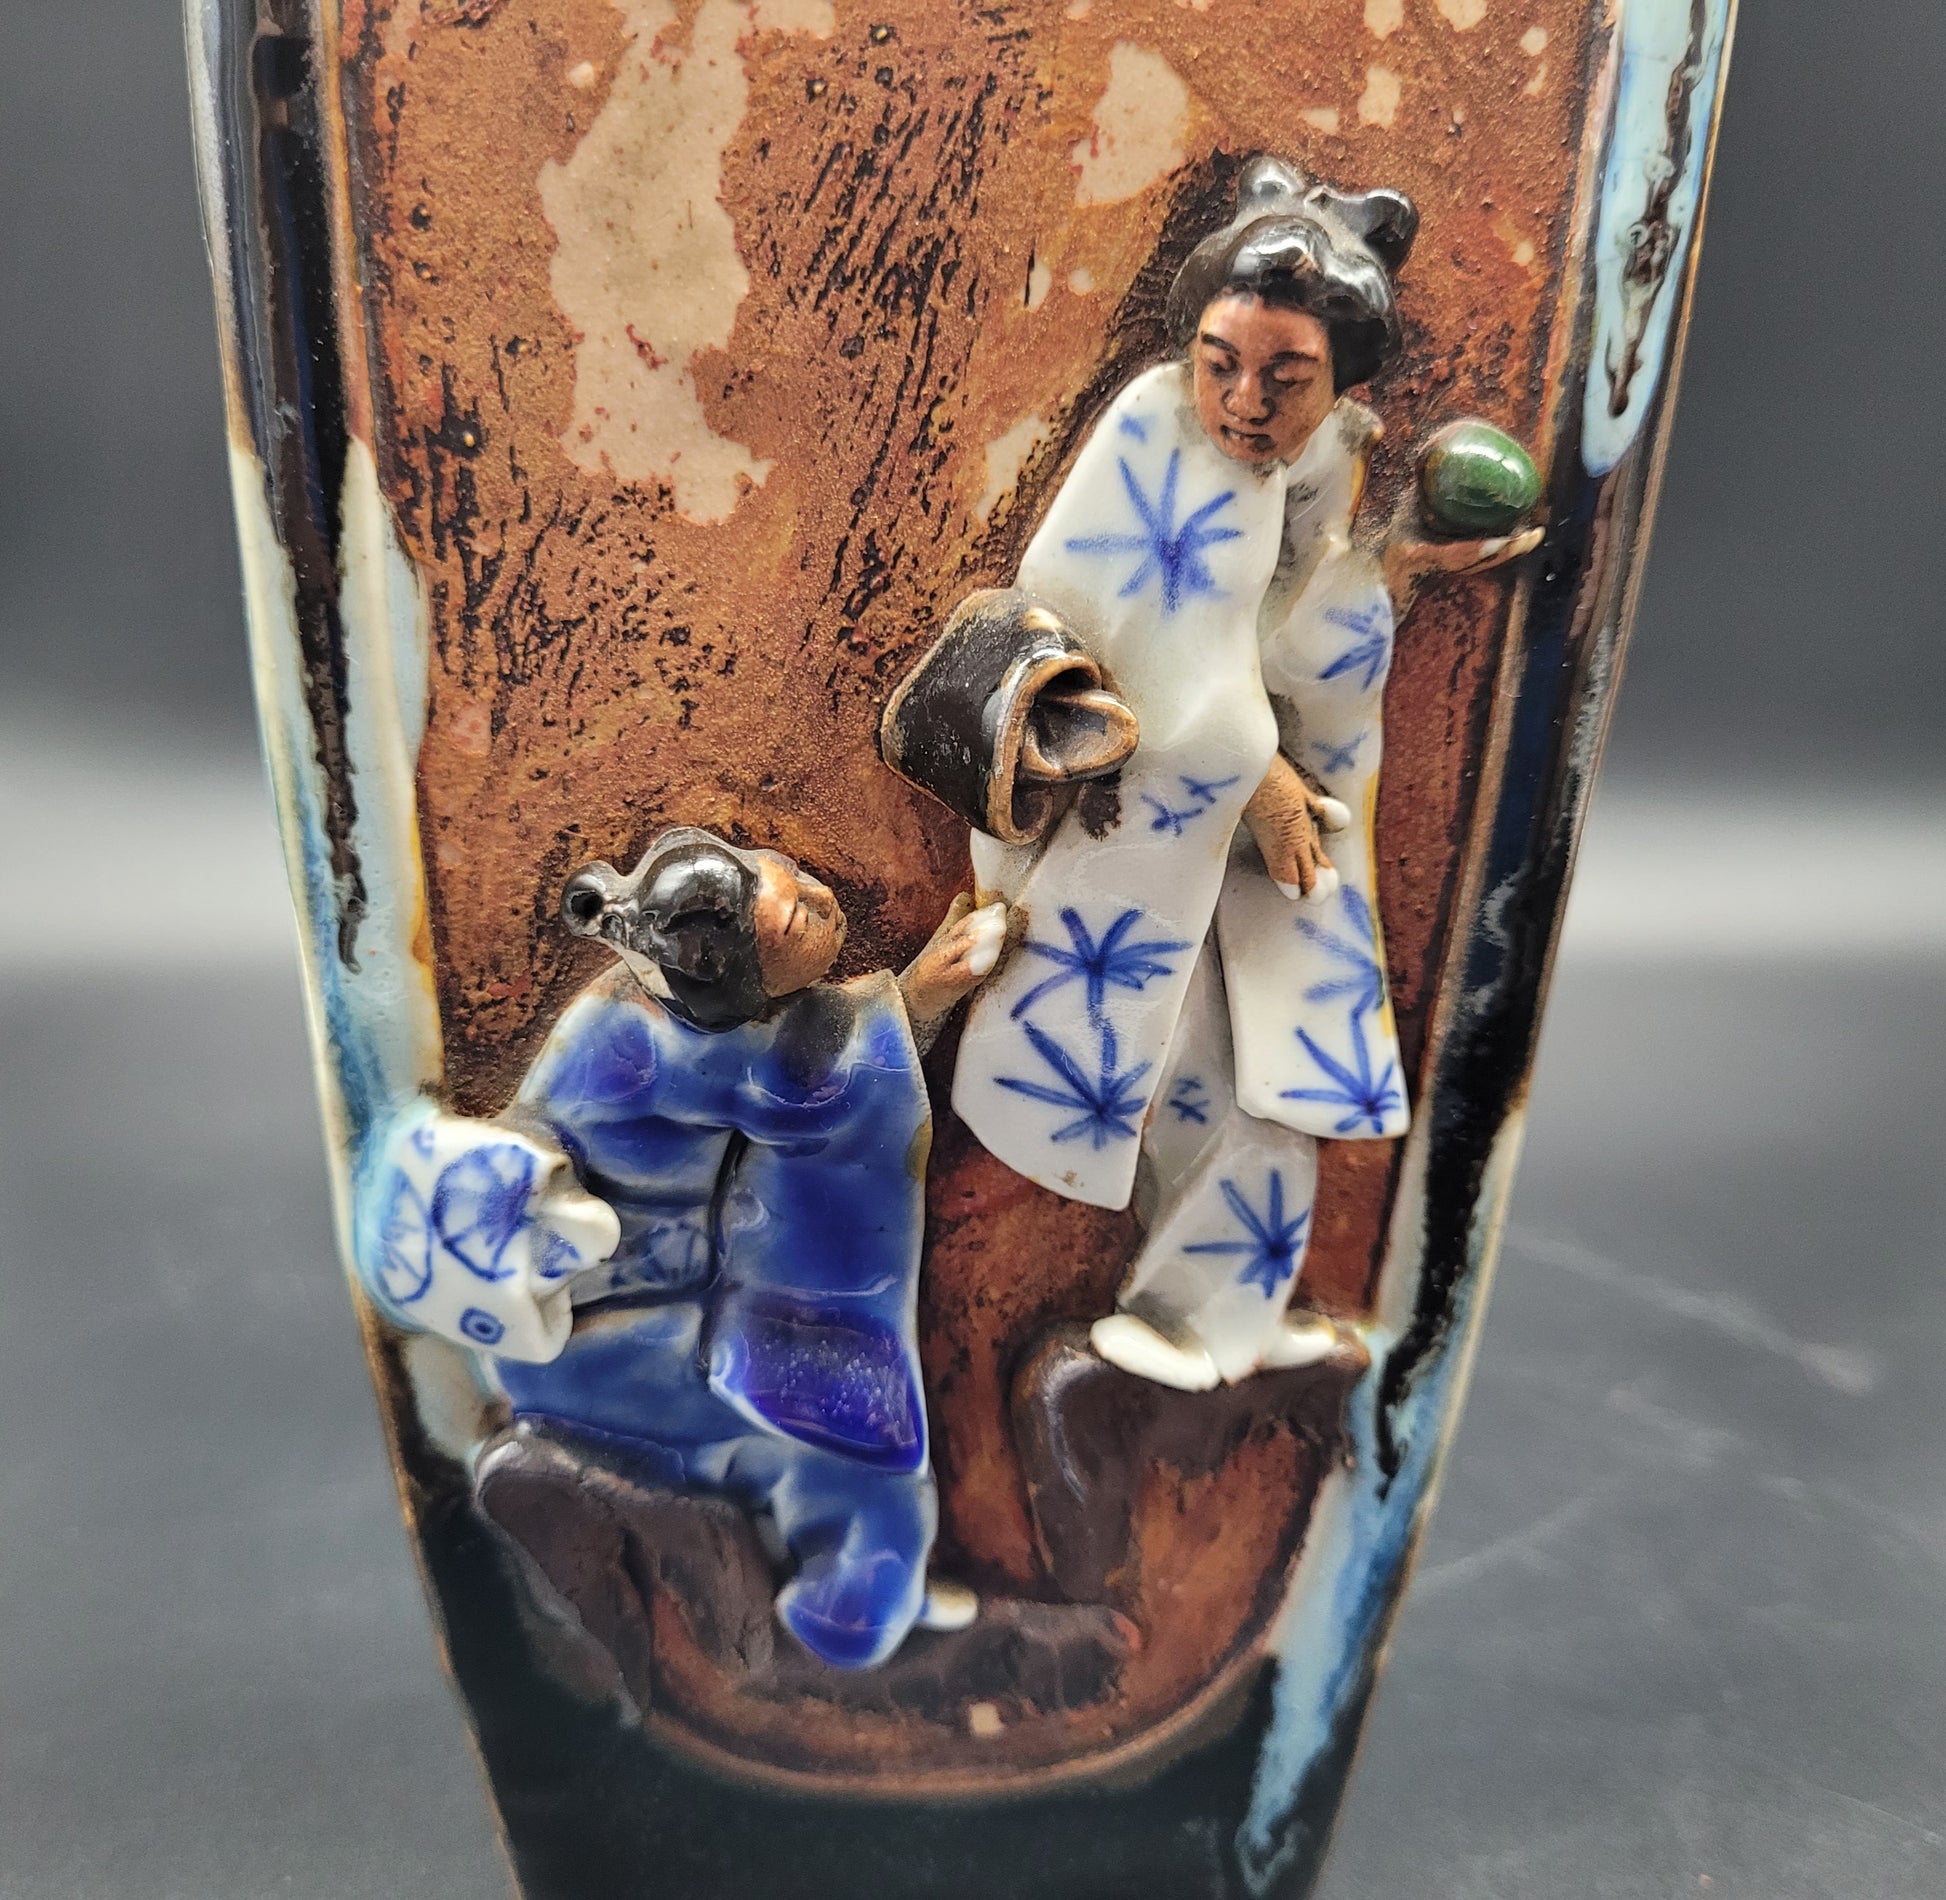 Highly Detailed Japanese Meiji Sumida Gawa Pottery Vases Signed By The Artist   Late 19th Century Meiji period  ANTIQUES FOR SALE UK